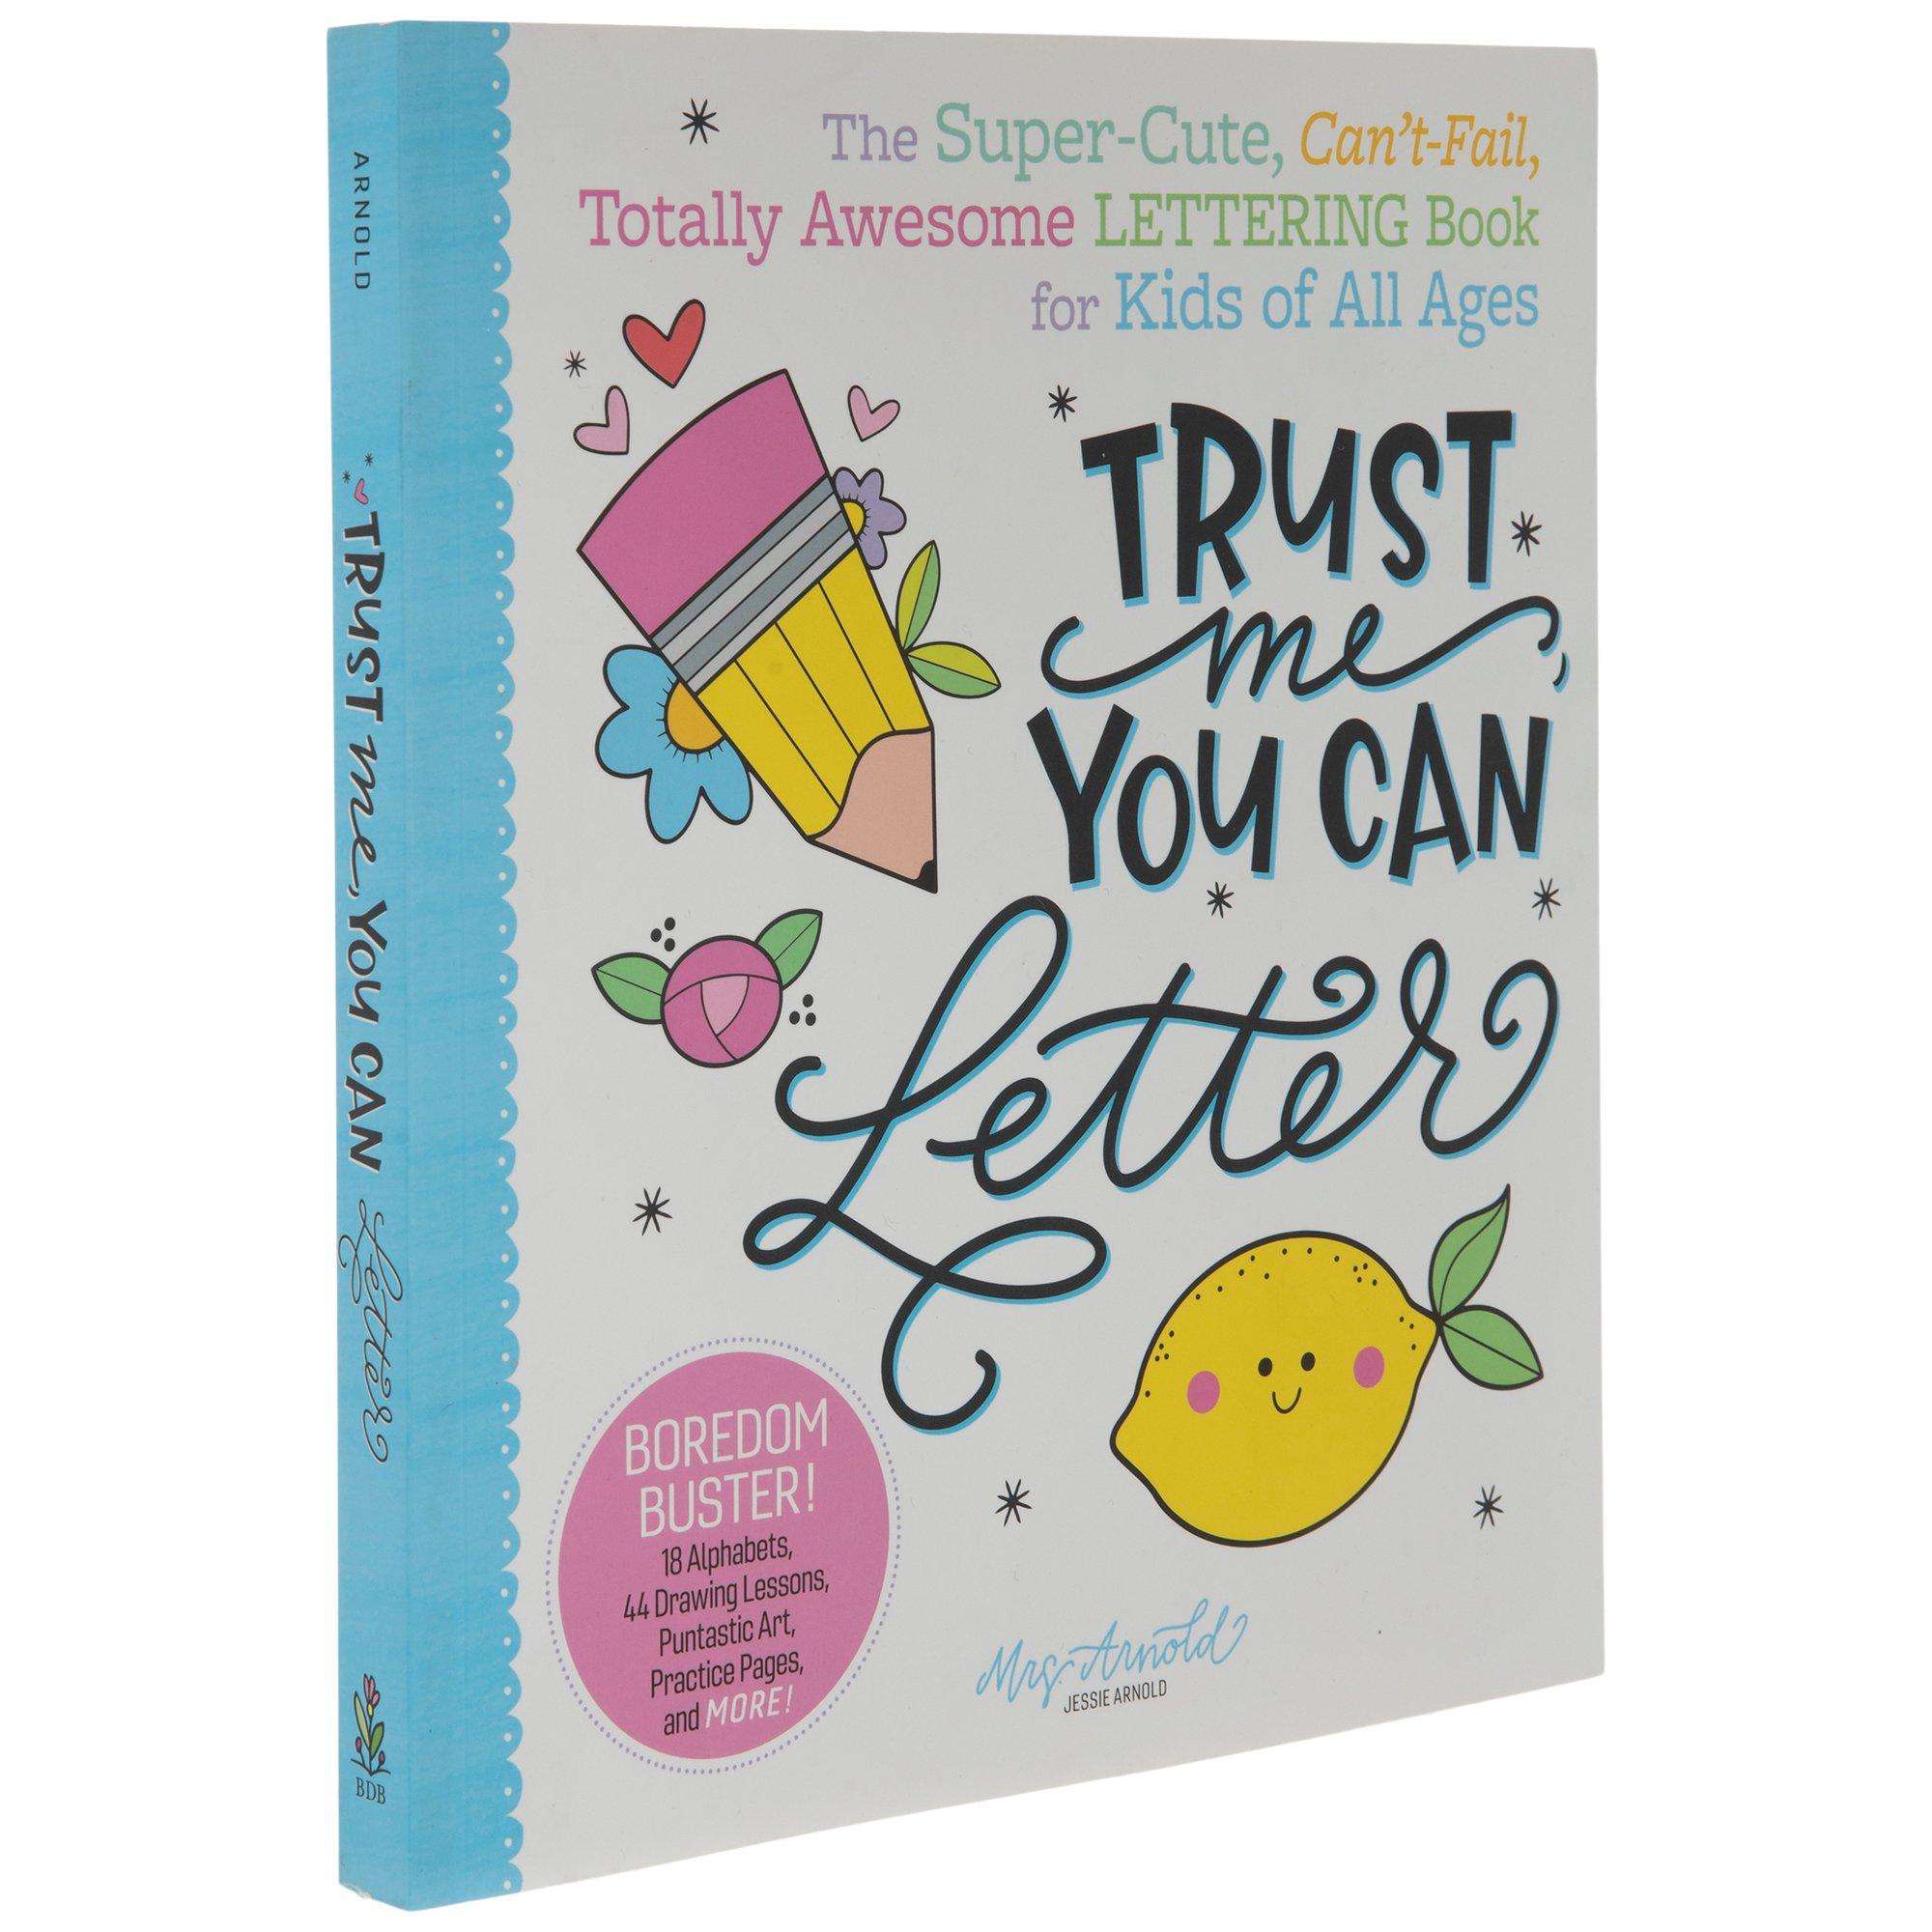 Trust Me, You Can Letter: The Super-Cute, Can't-Fail, Totally Awesome Lettering Book for Kids of All Ages [Book]